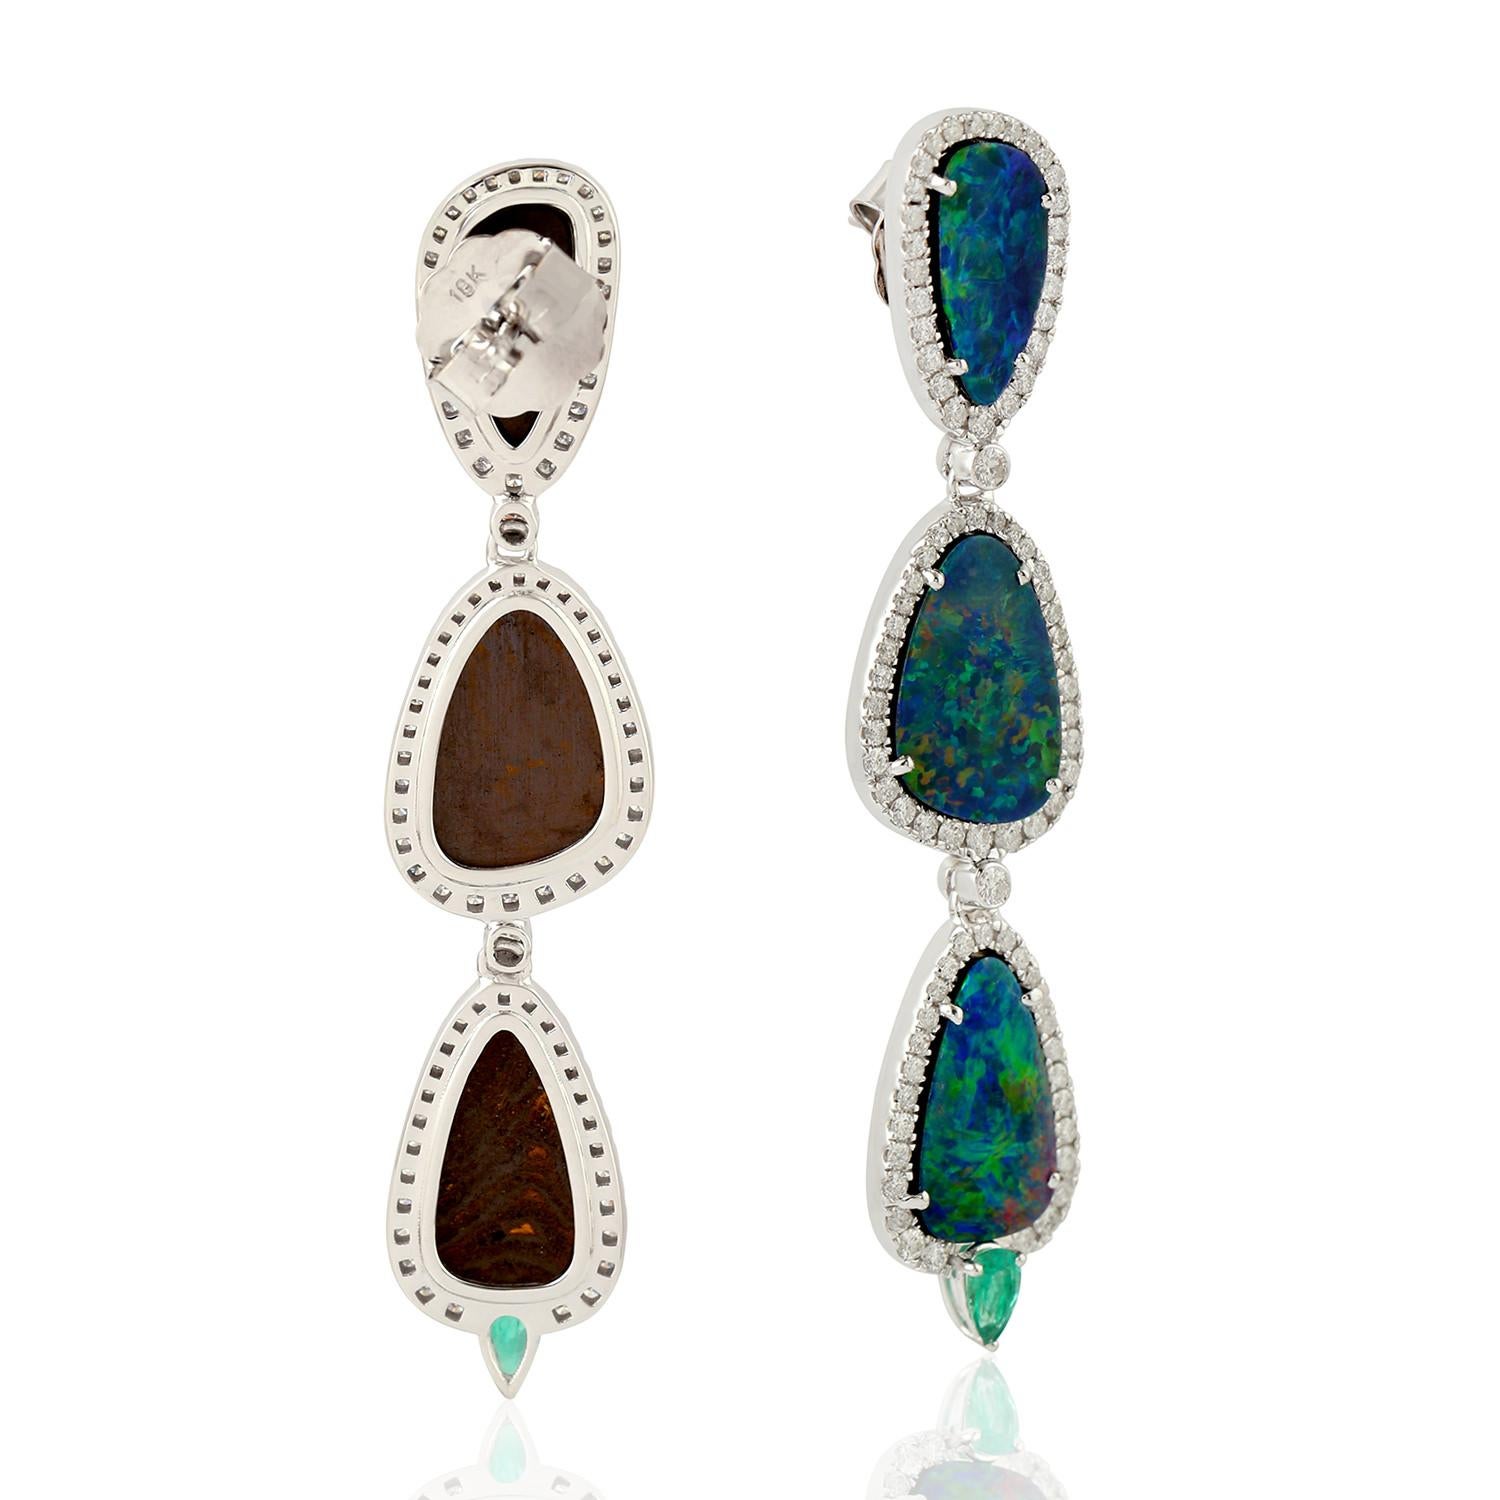 Handcrafted from 18-karat gold, these exquisite drop earrings are set with 14.11 carats Opal doublet, 0.32 carats emerald and 1.62 carats of glimmering diamonds.

FOLLOW  MEGHNA JEWELS storefront to view the latest collection & exclusive pieces. 